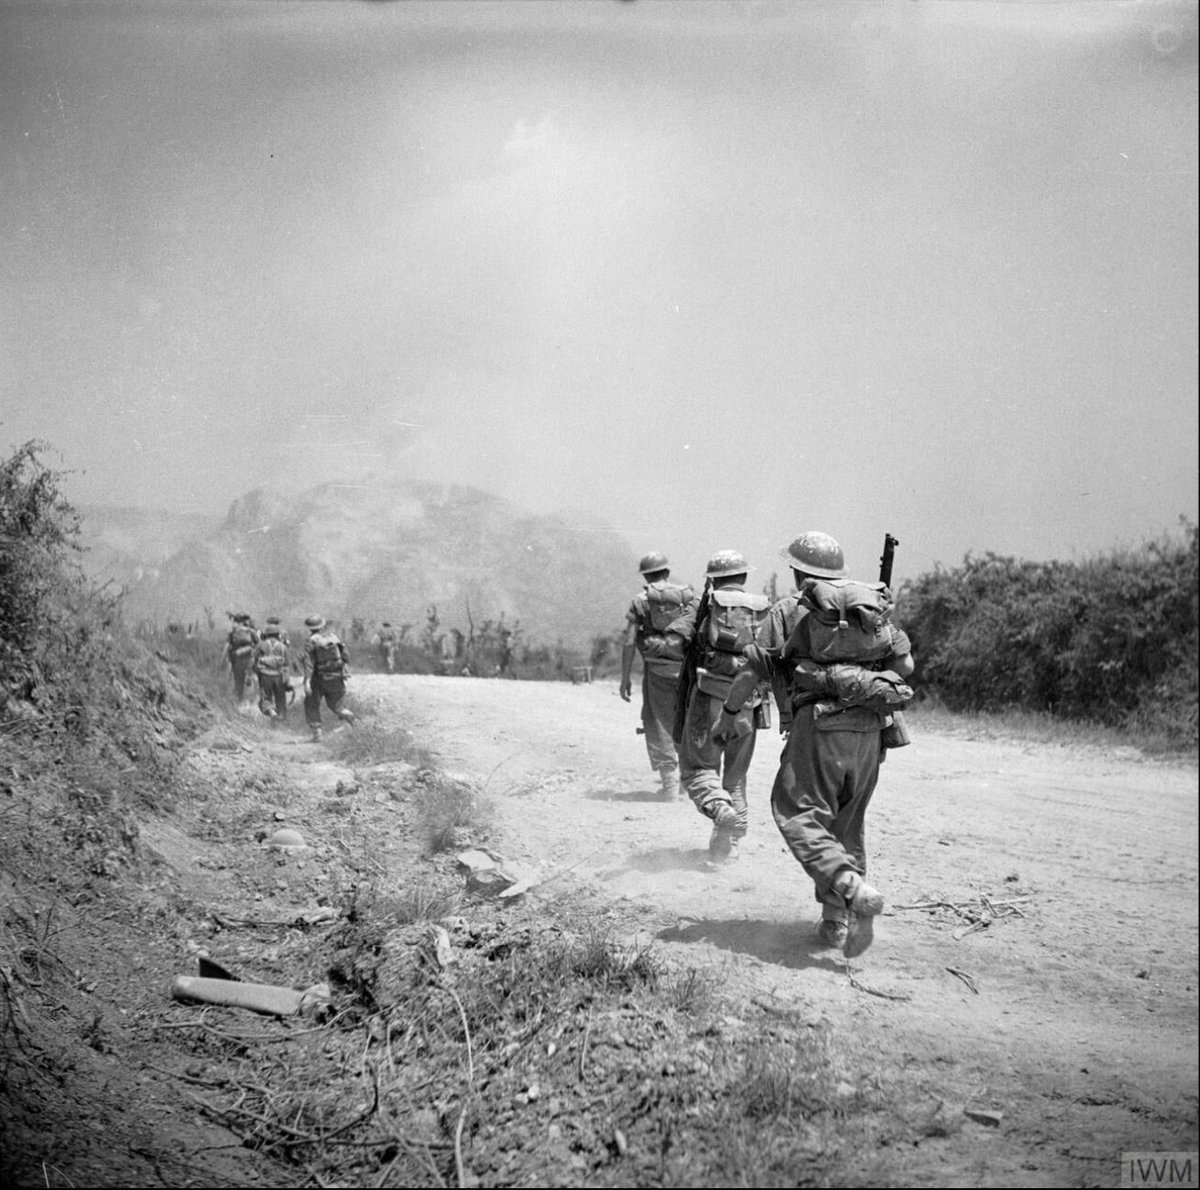 Today in 1944, British troops of 6th Battalion, Royal Inniskilling Fusiliers march along a dusty road towards Monte Cassino, as the artillery of Eighth Army bombards Monastery Hill. Photo: Sergeant Loughlin, @I_W_M NA 15059